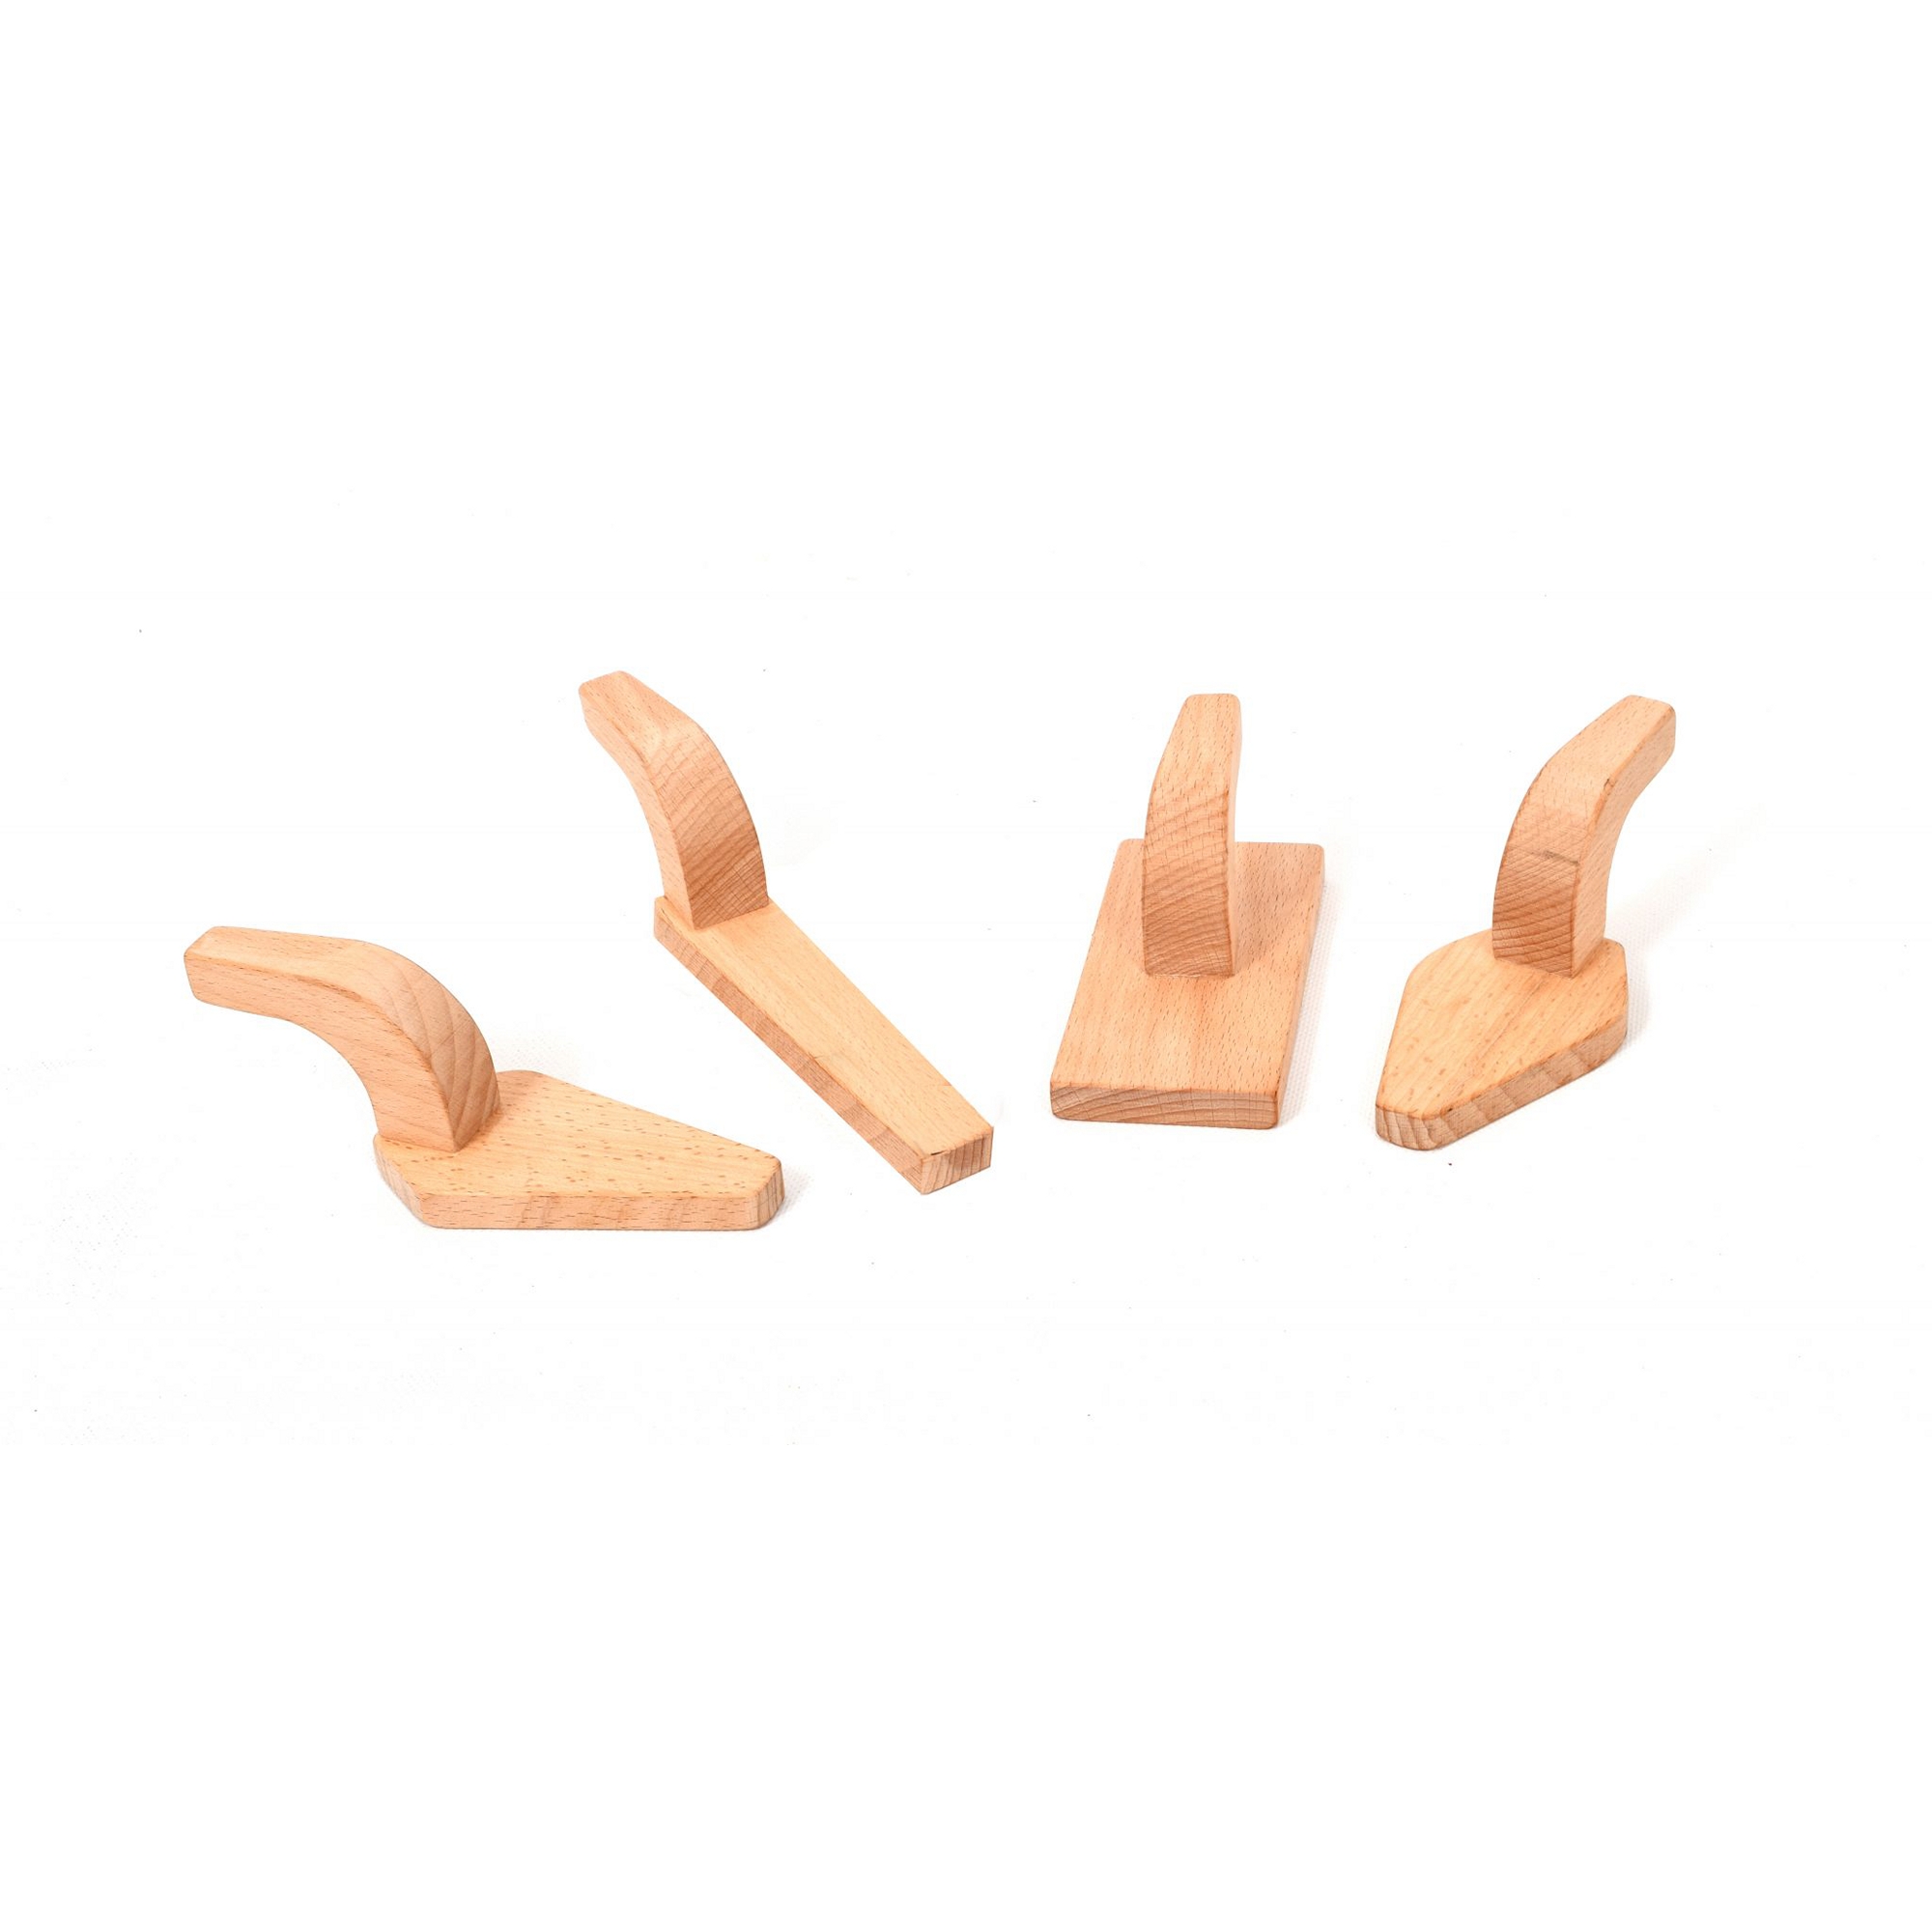 Wooden Construction Tools - Pack of 4